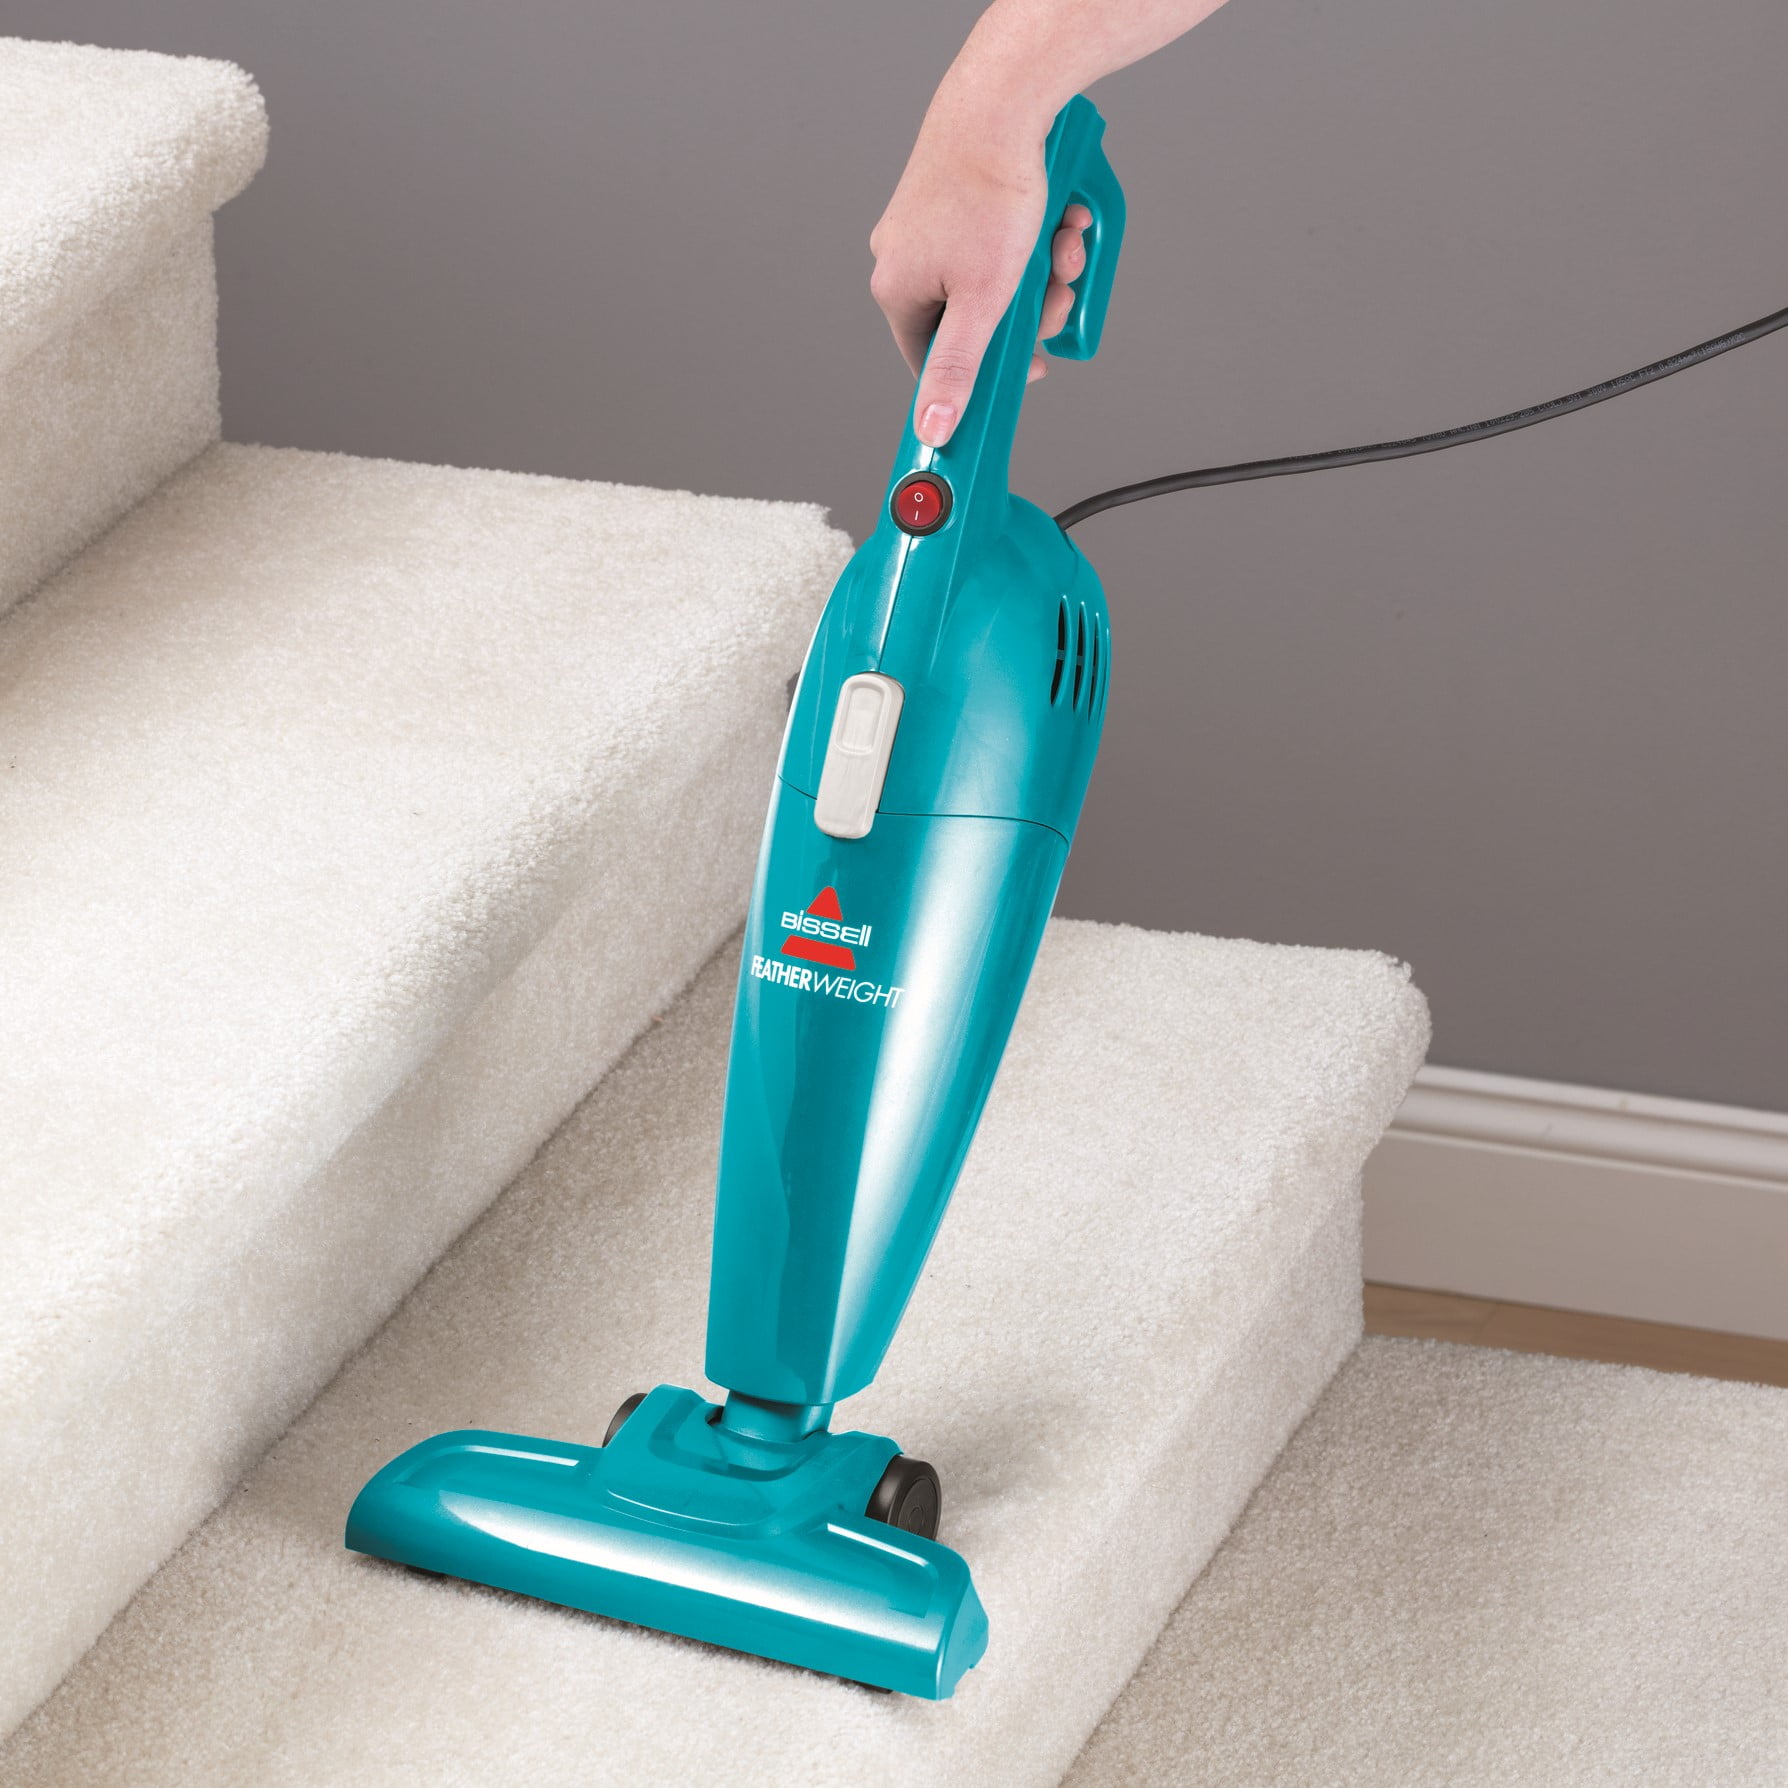 BISSELL Featherweight Stick Lightweight Bagless Vacuum & Electric Broom in Teal, BSL2033 - 1